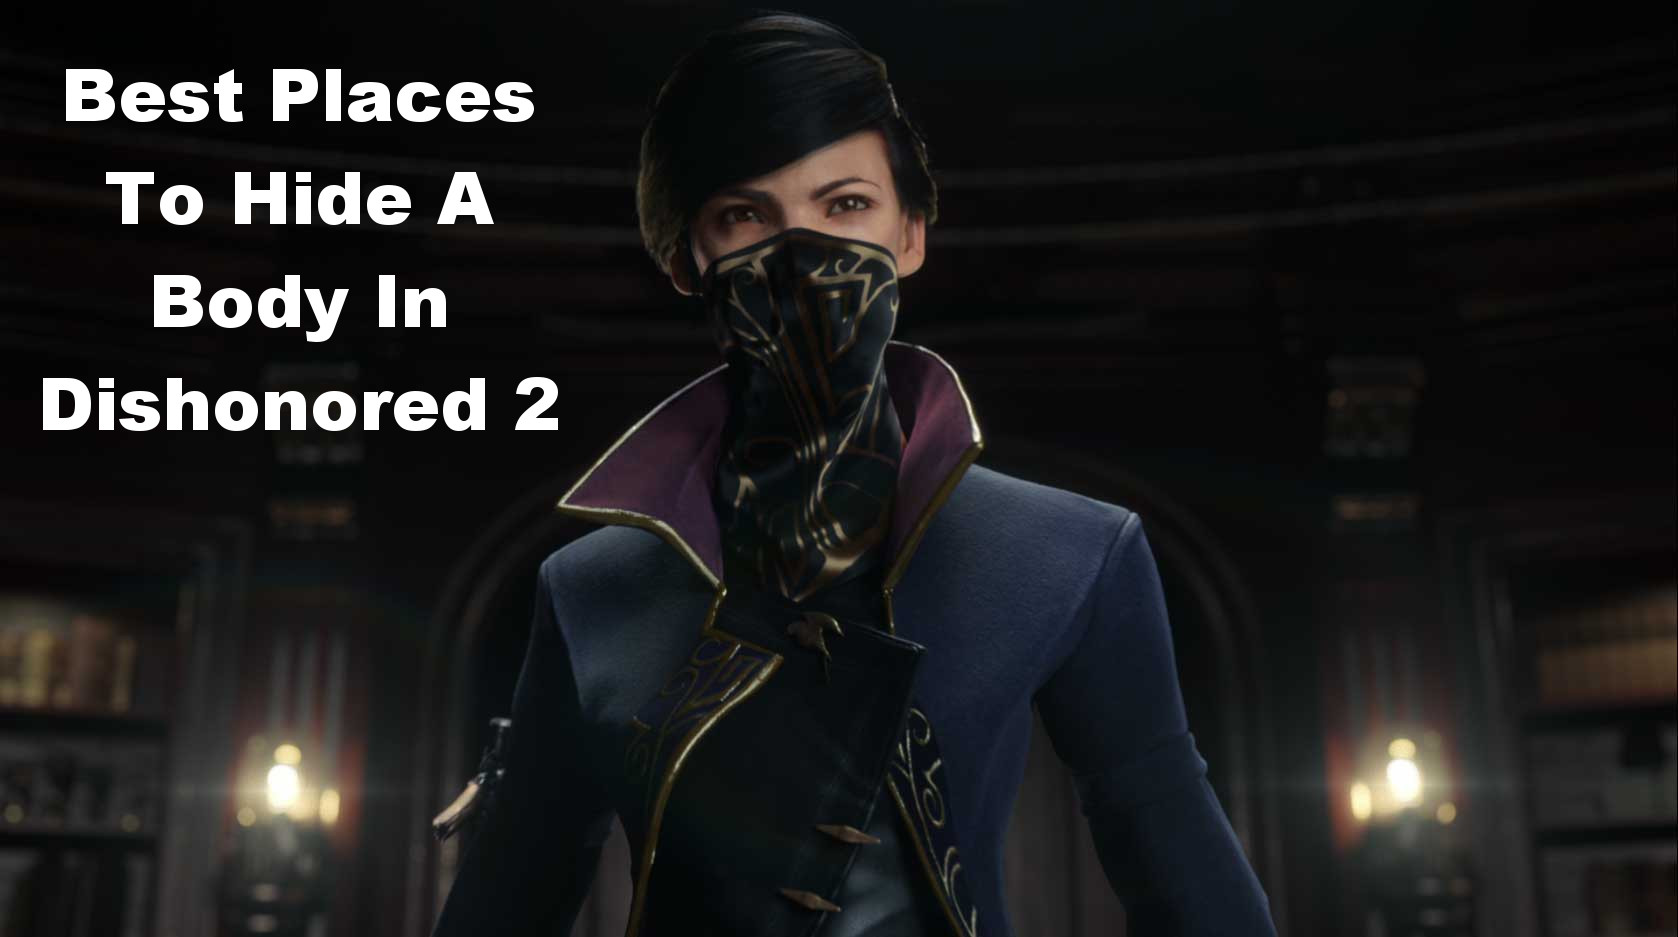 Best Places To Hide a Body In Dishonored 2